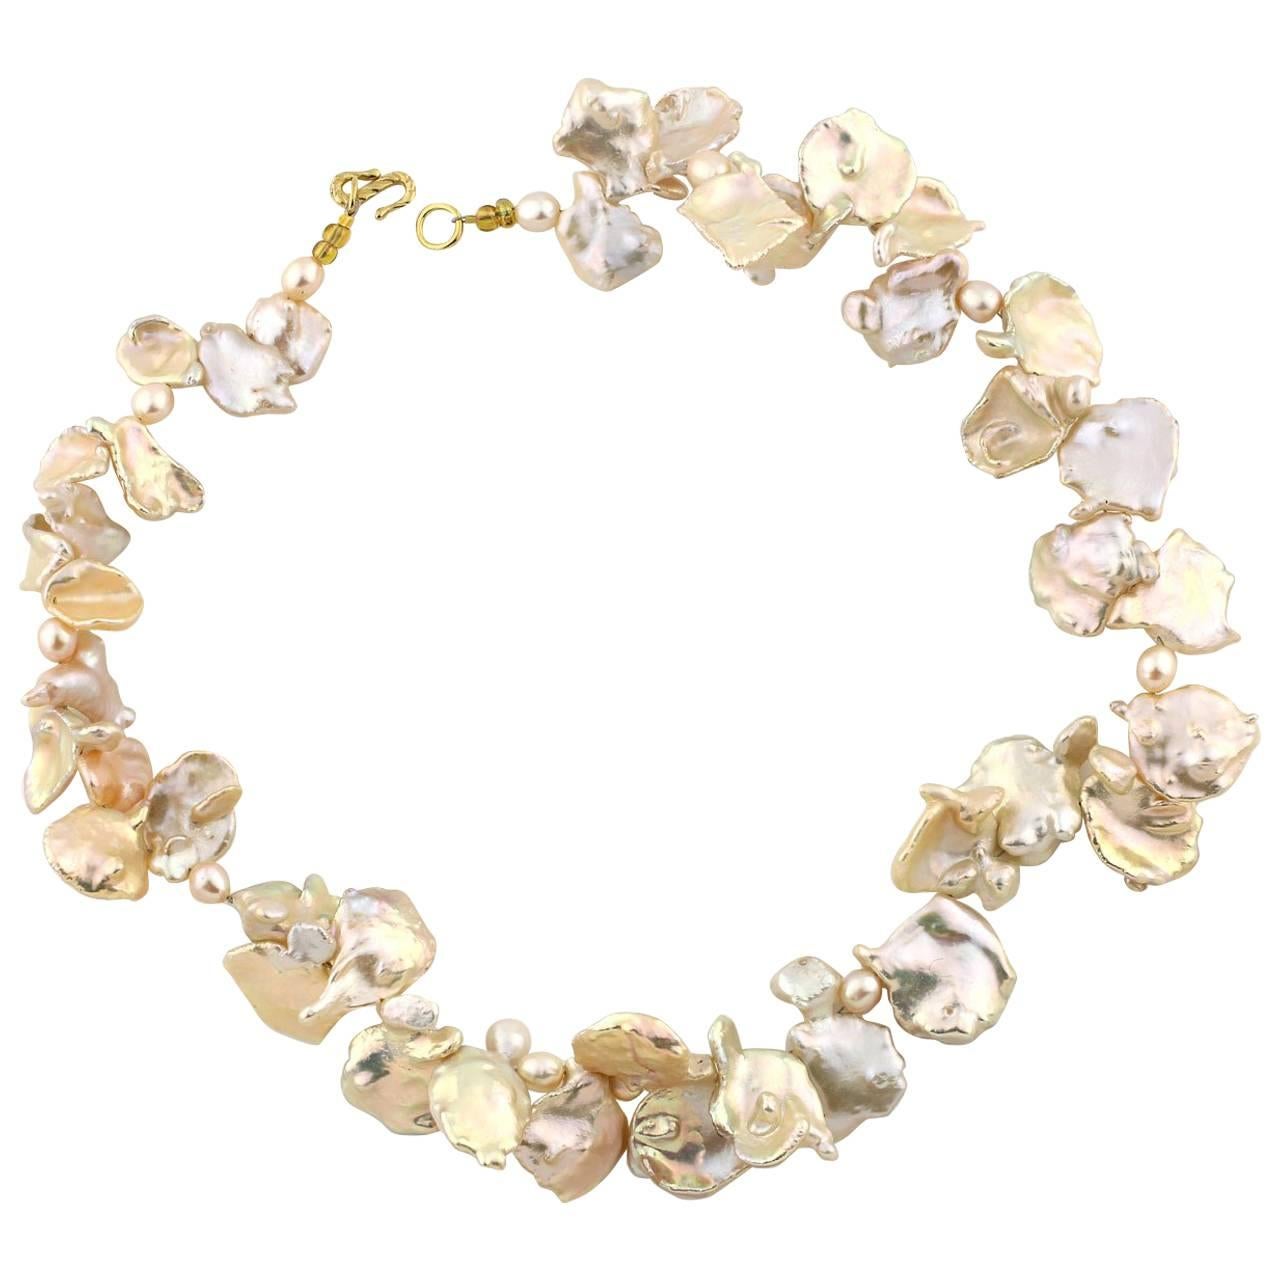 Light Peachy Goldy color Keshi Pearl necklace